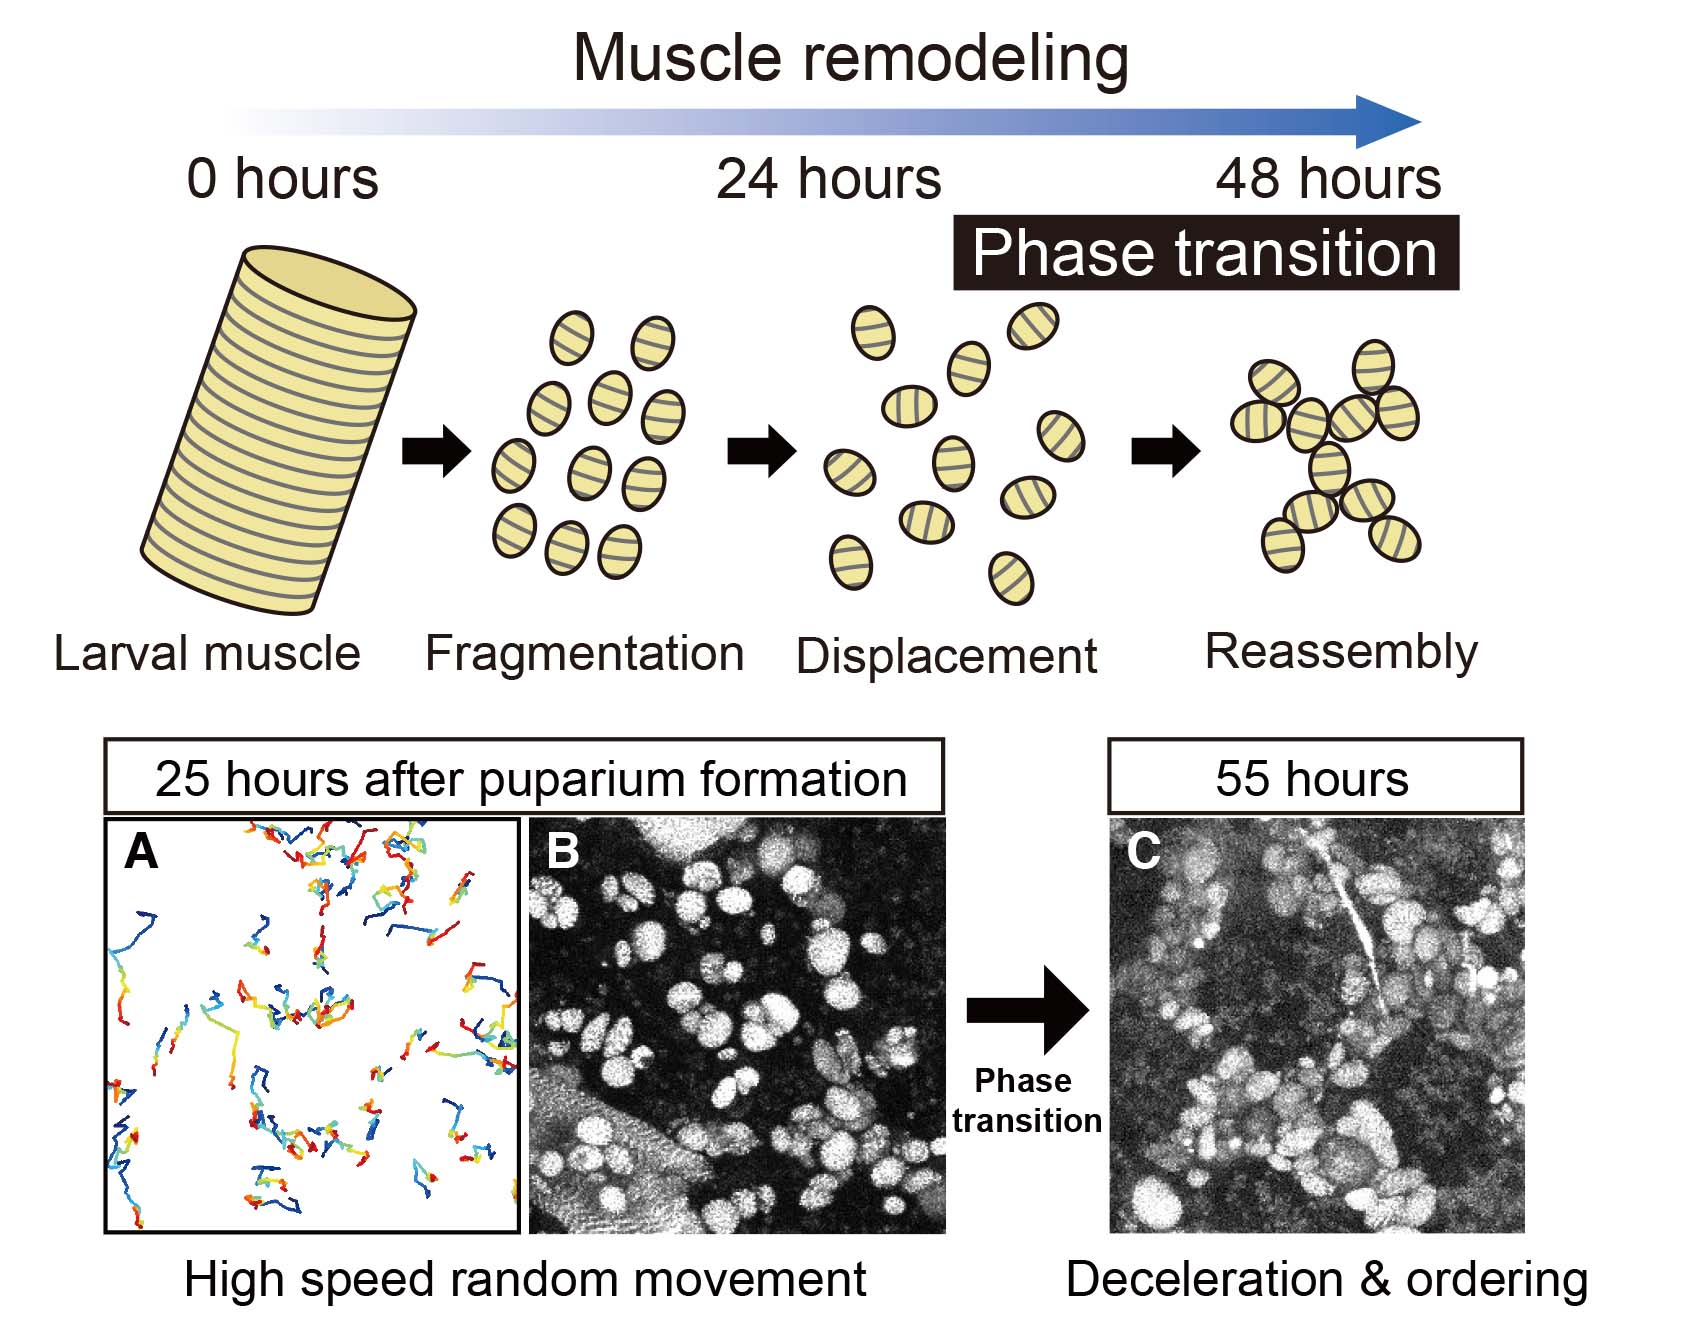 Muscle cell swarm intelligence: Understanding the phase-transition dynamics of muscle remodeling during insect metamorphosis